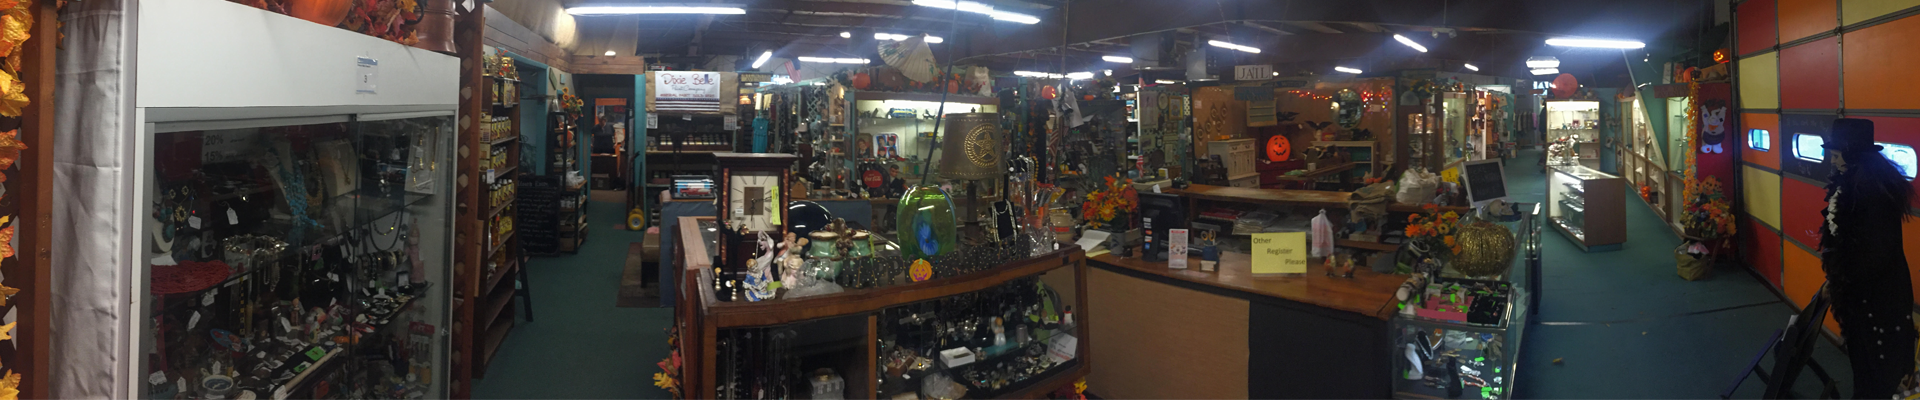 Welcome - Scranberry Coop - Vintage Store - Antiques, Collectibles, & More